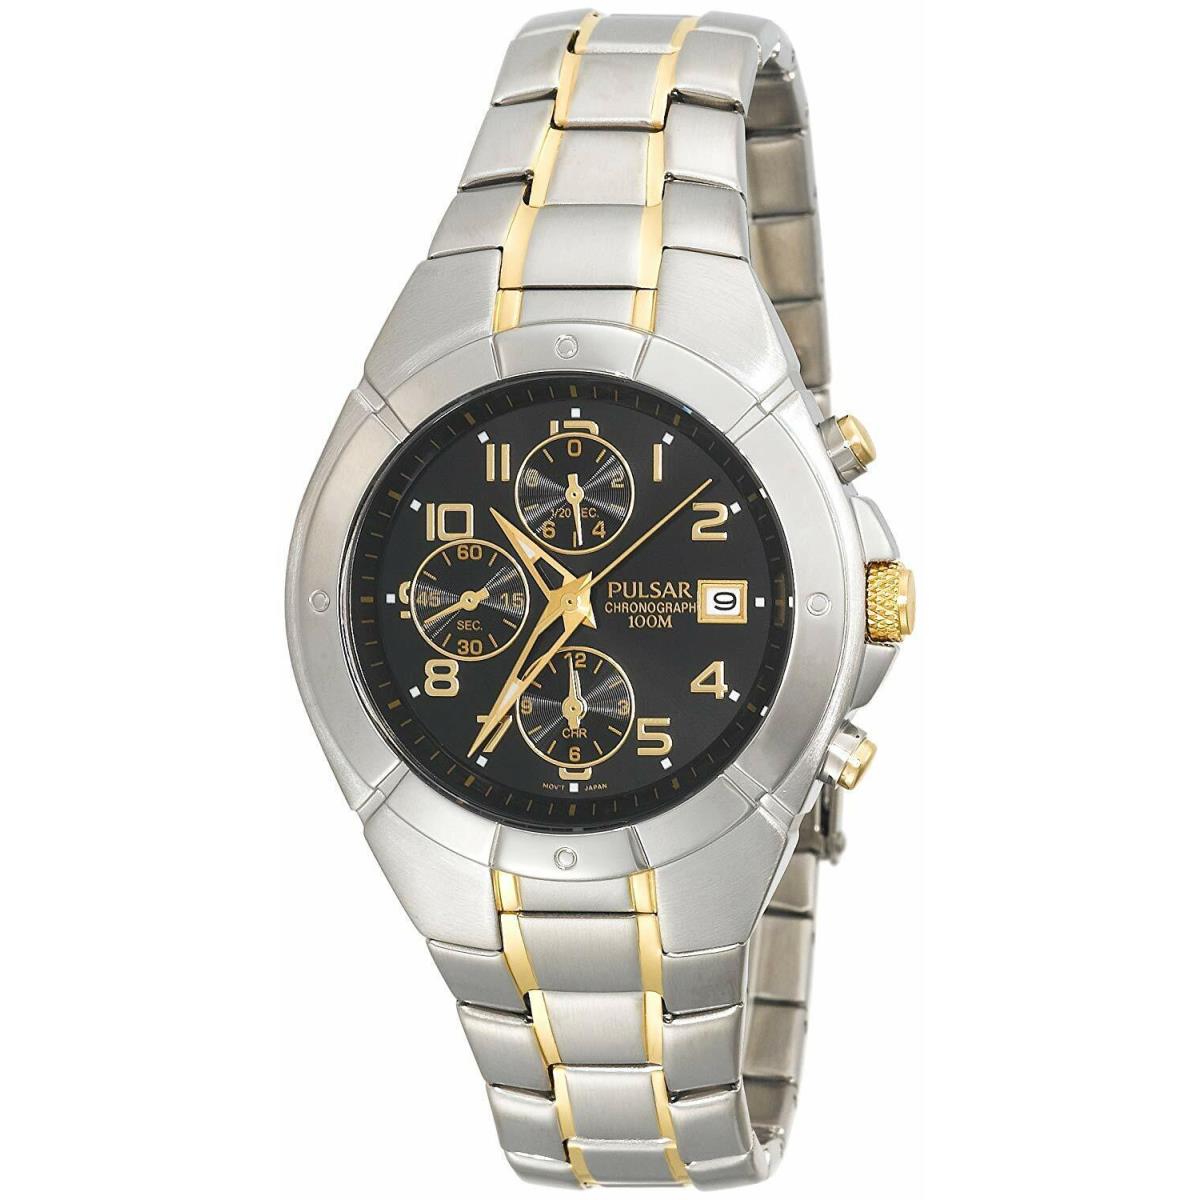 Pulsar PF8188 Men`s Black Dial Chronograph Stainless Steel Two-tone Dress Watch